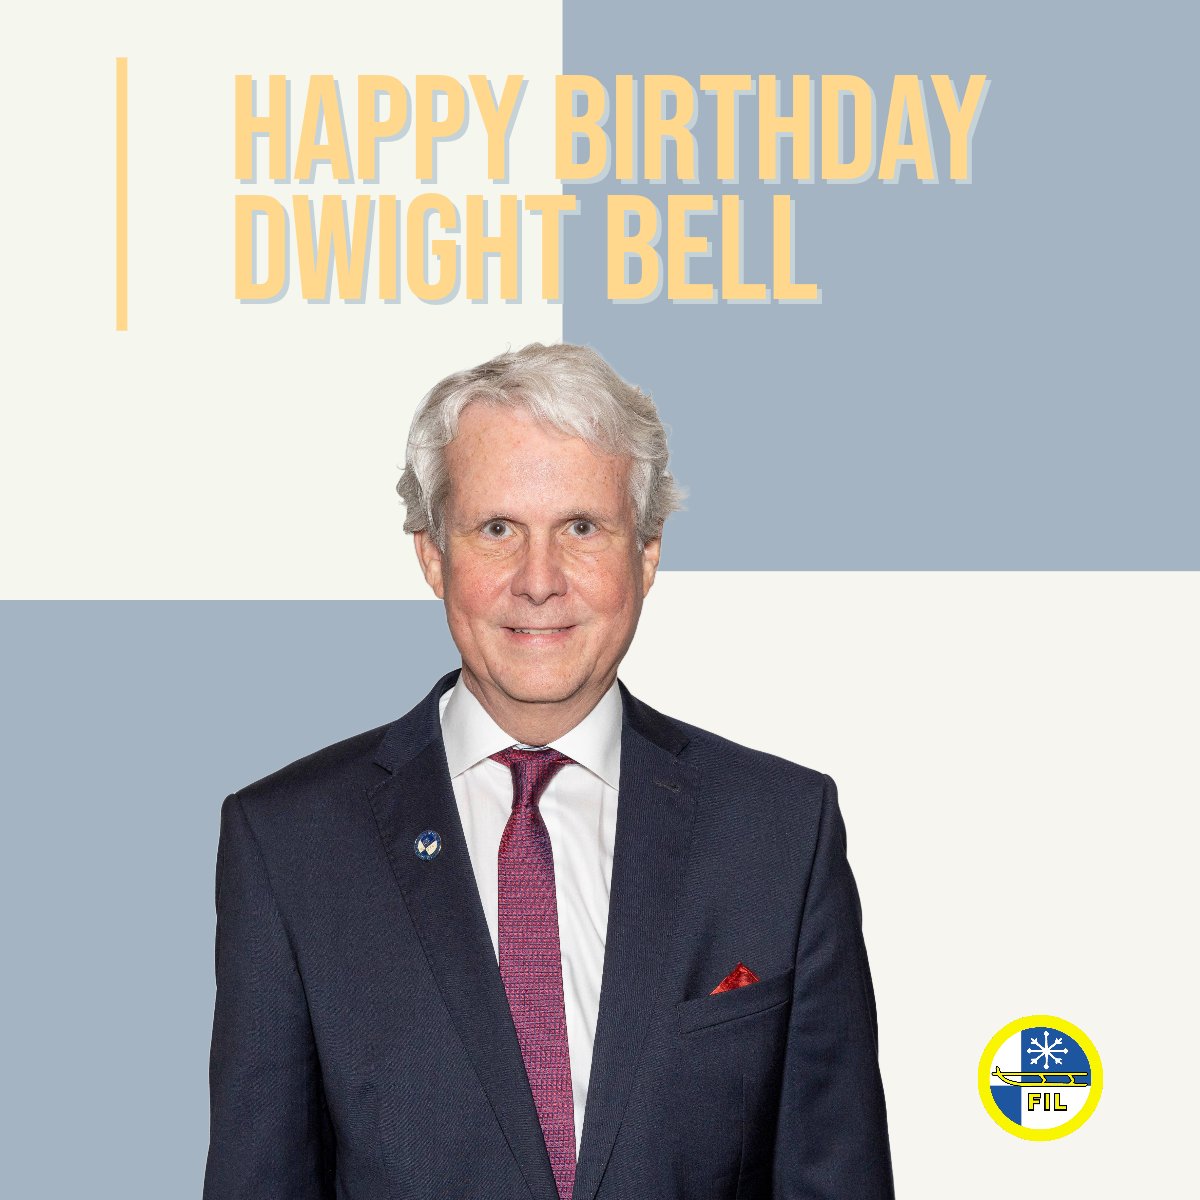 🎉🎂 Let's Celebrate! 🎂🎉 Today on Friday, May 3rd, we're celebrating a very special day - it's the birthday of our FIL General Secretary, Dwight Bell! 🥳🎉 Join us in sending your warmest wishes to Dwight on his special day! 🎈 Let's shower him with love, appreciation, and all…